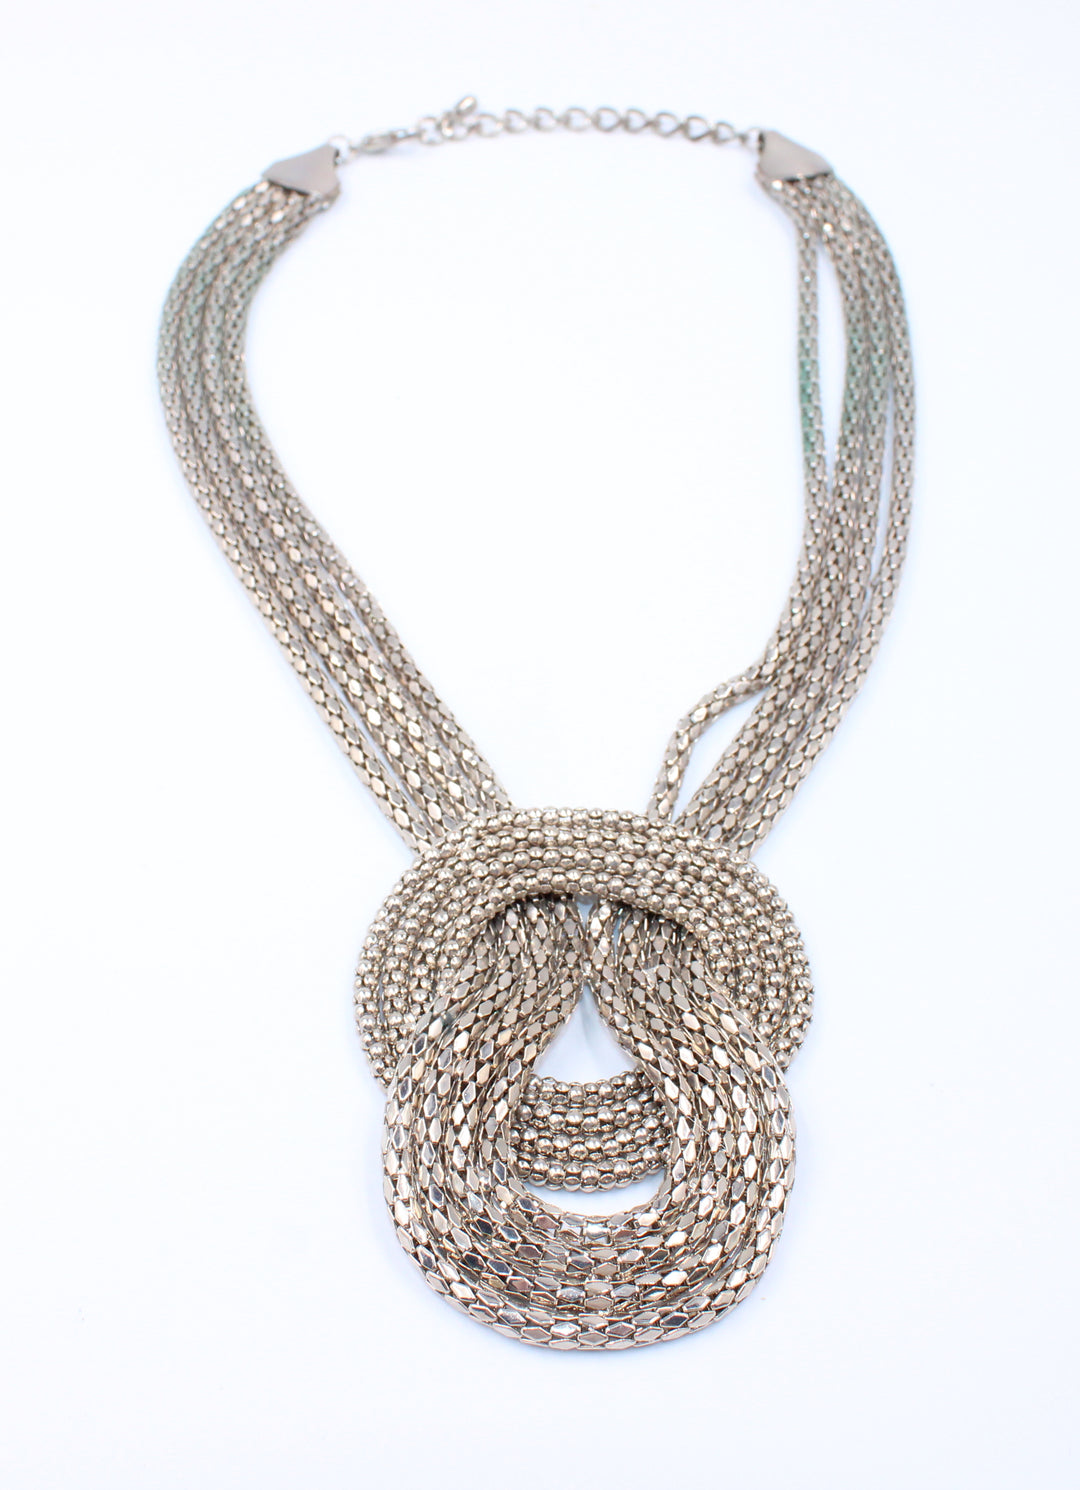 TIE KNOT NECKLACE